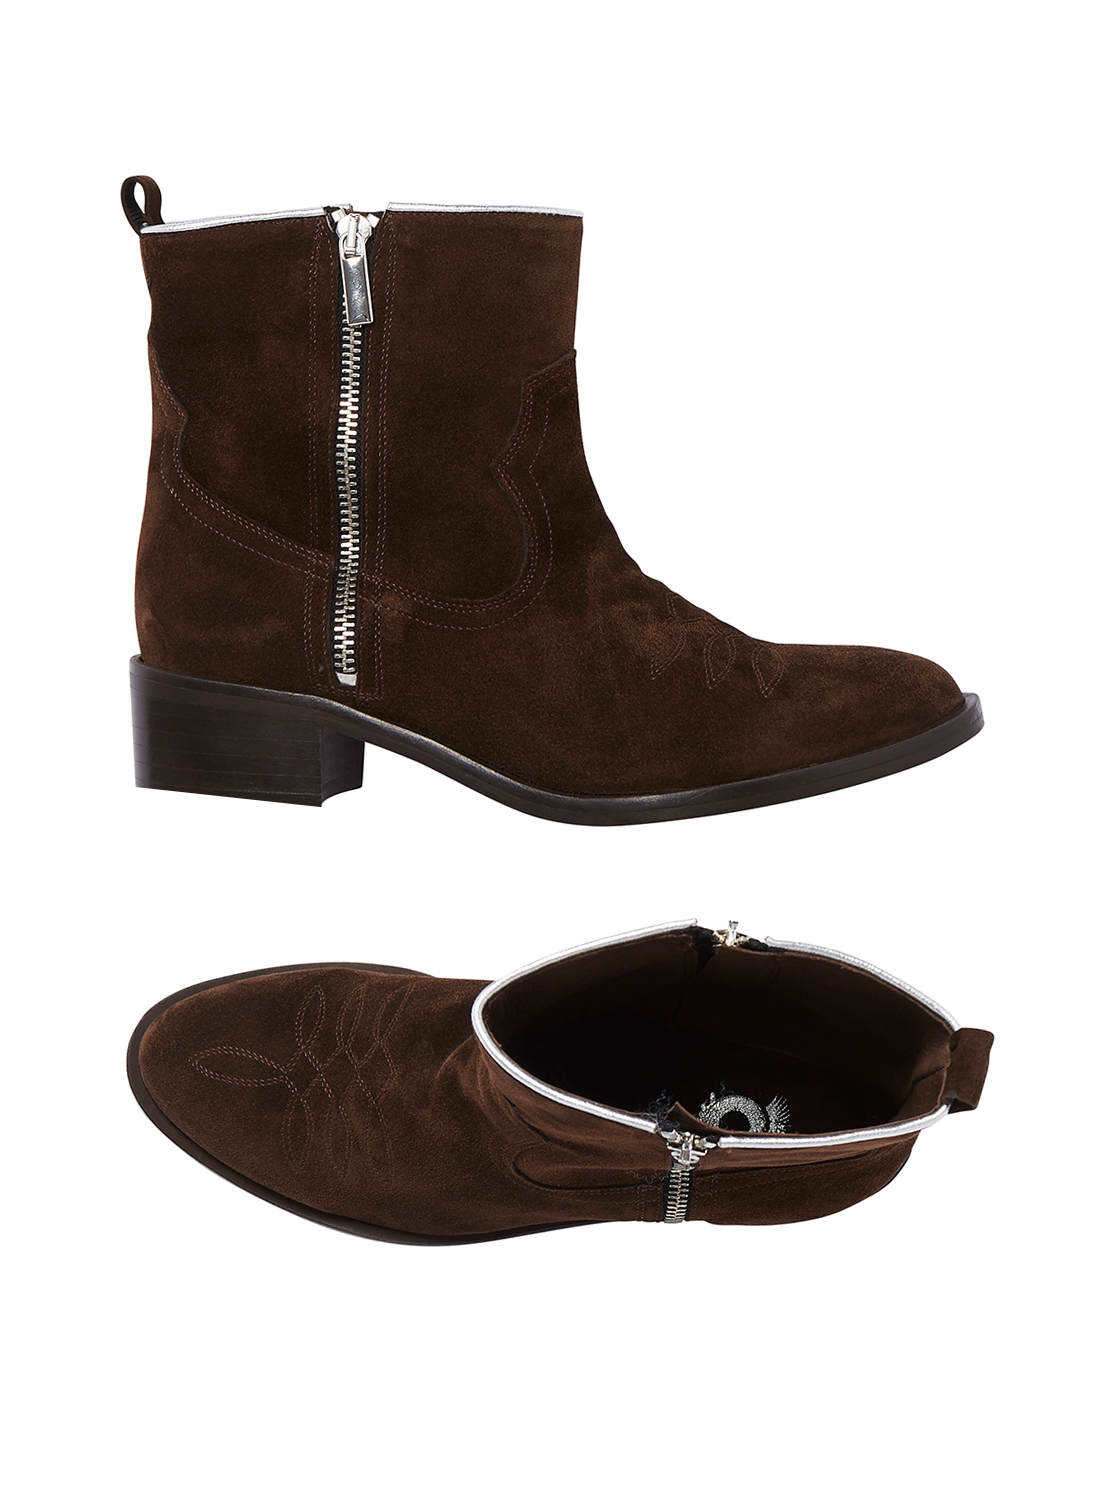 Suede Cowboy Ankle Boots Chocolate Brown